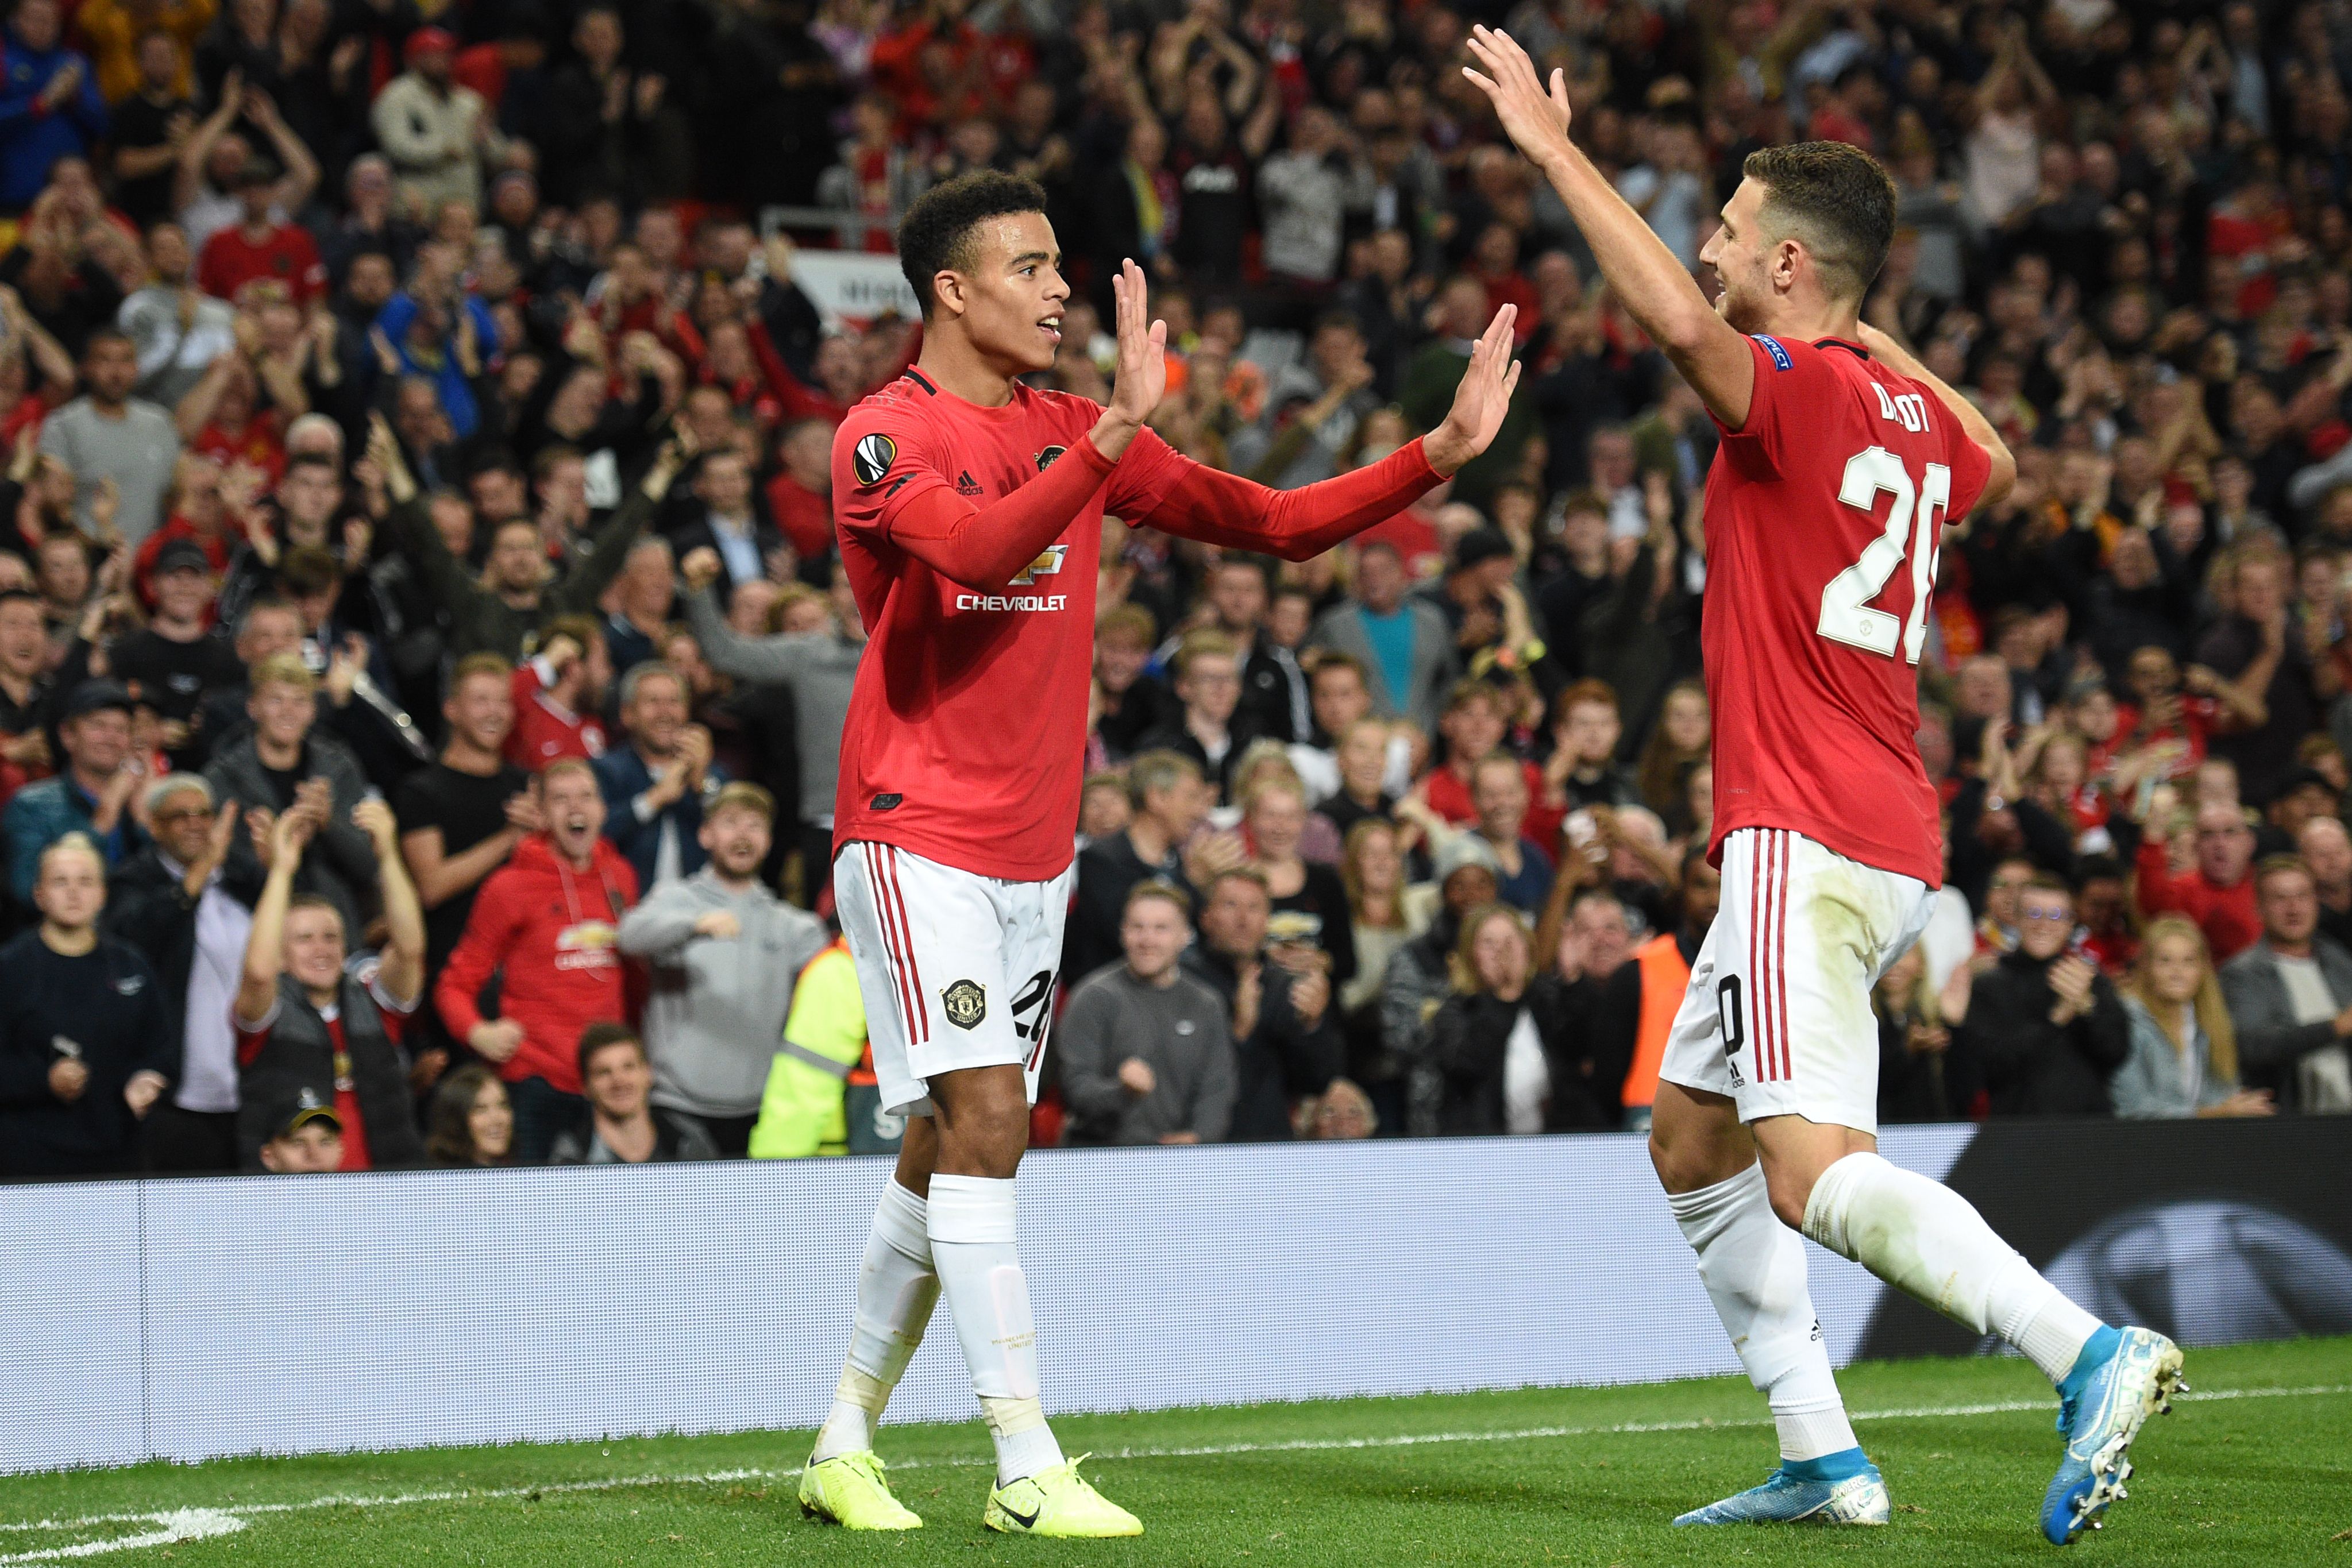 Manchester United's striker Mason Greenwood (L) celebrates with Manchester United's Portuguese defender Diogo Dalot (R) after scoring the opening goal of the UEFA Europa League Group L football match between Manchester United and Astana at Old Trafford in Manchester, north west England, on September 19, 2019. (Photo by Oli SCARFF / AFP)        (Photo credit should read OLI SCARFF/AFP/Getty Images)